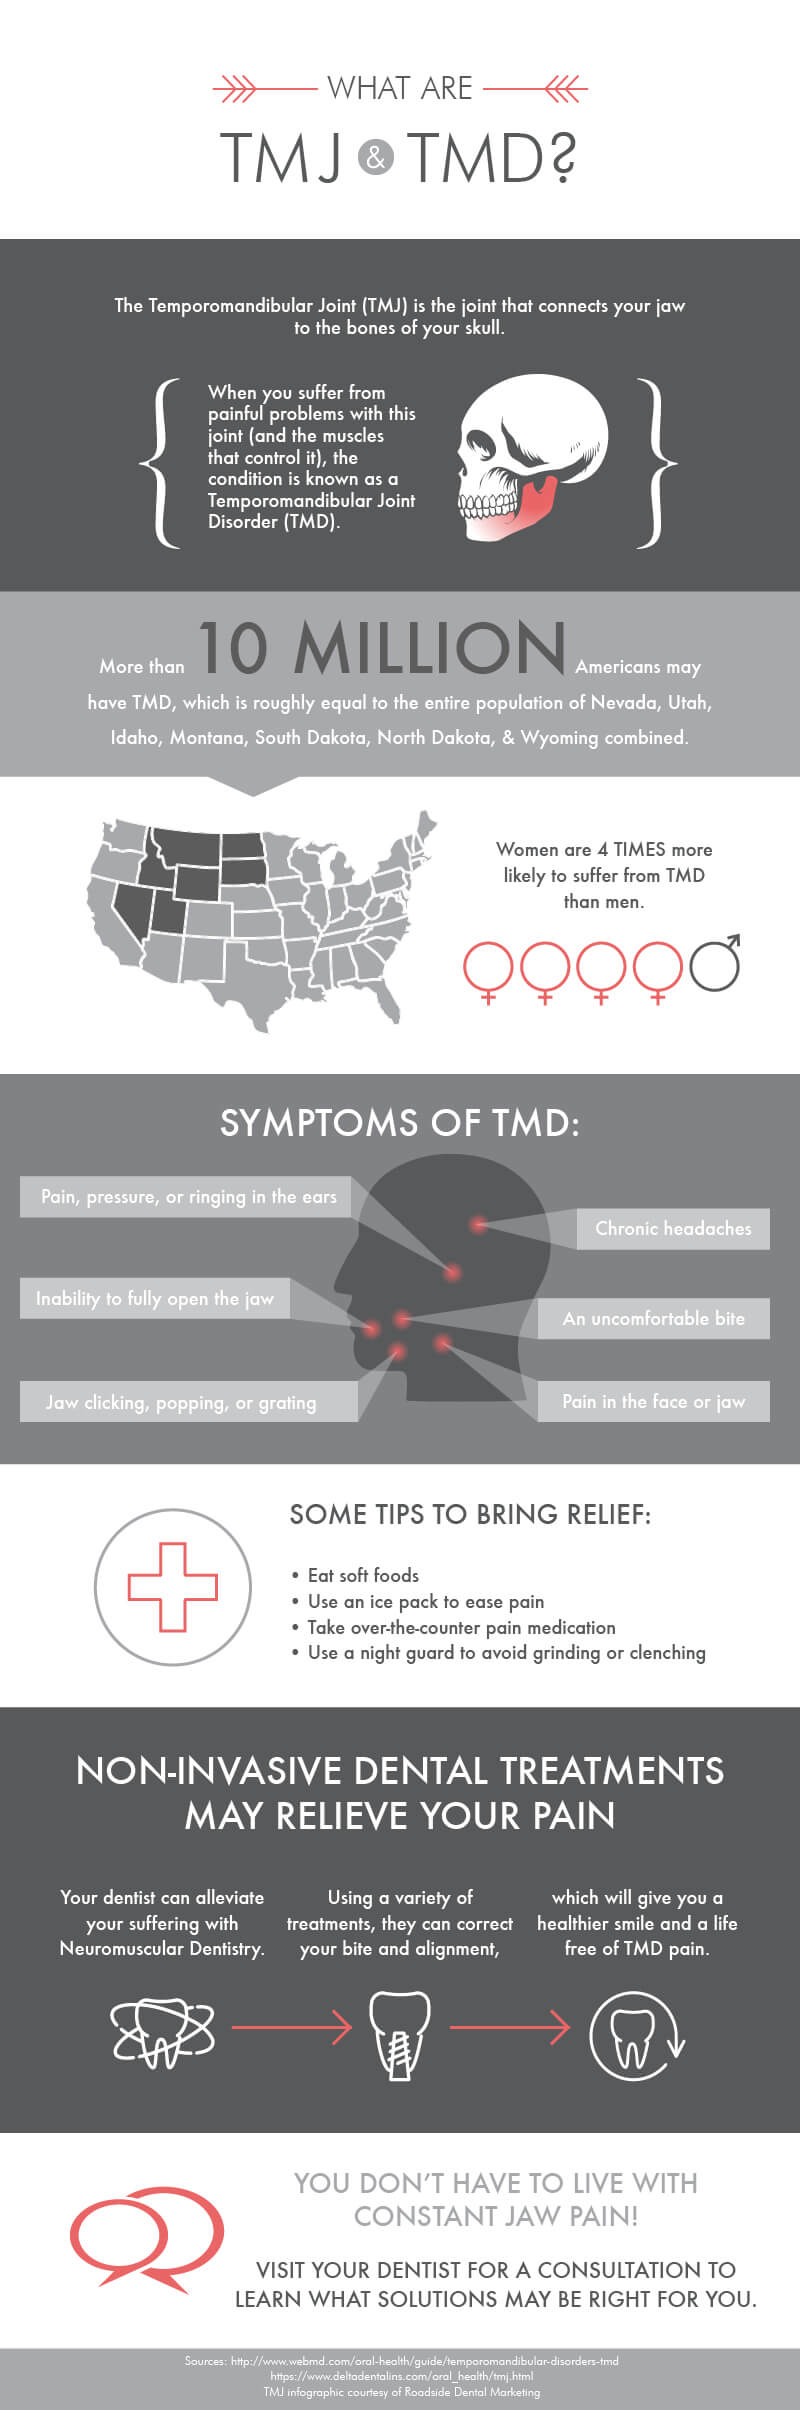 find relief for frequent headaches and jaw pain by seeking treatment for TMD from your dentist